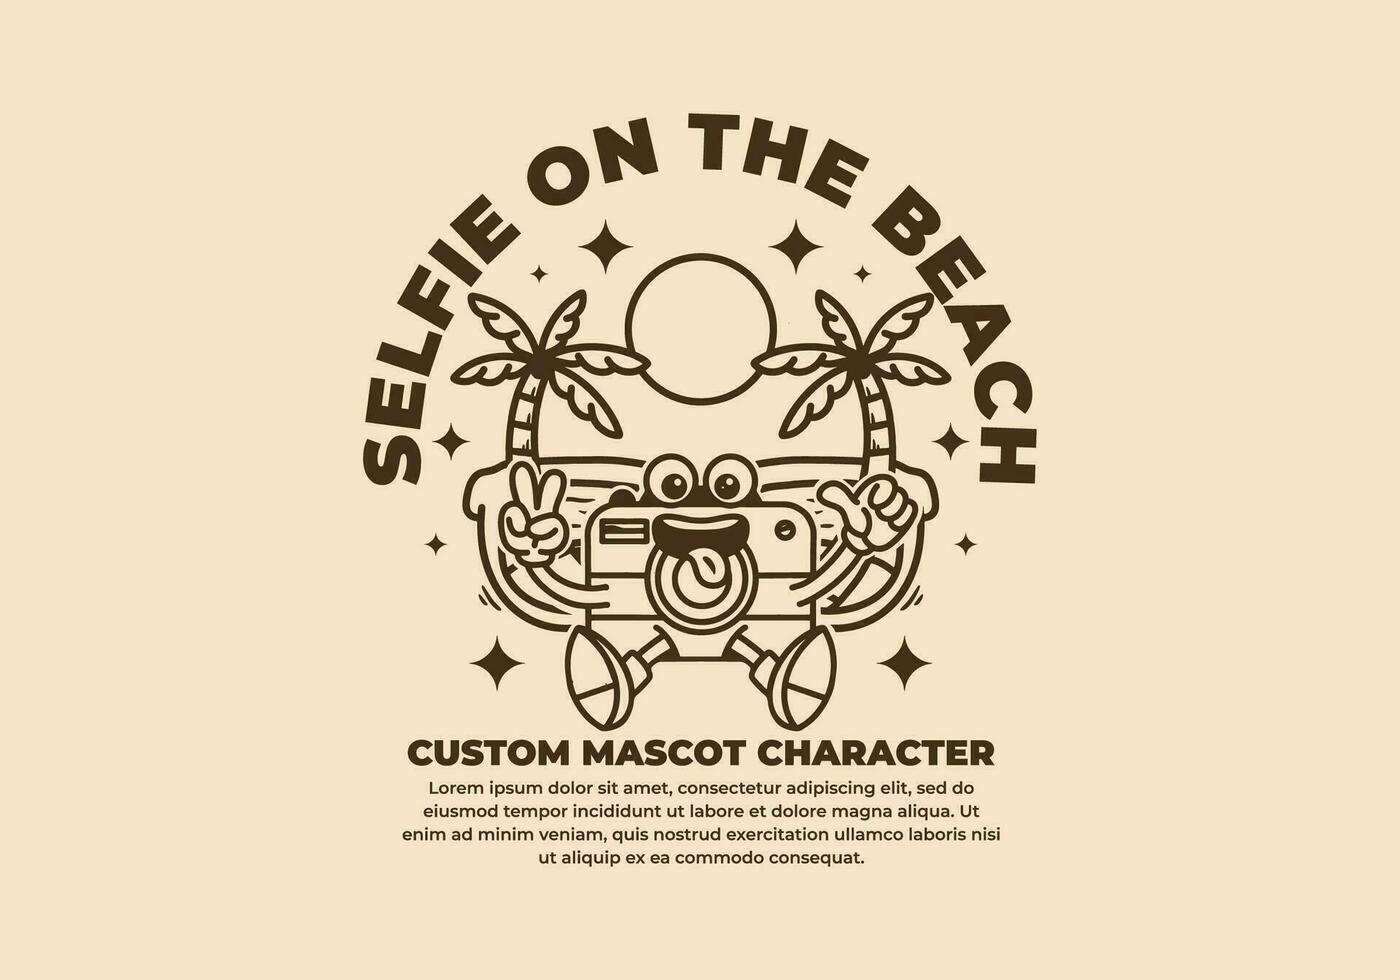 Mascot character of camera on the beach vector